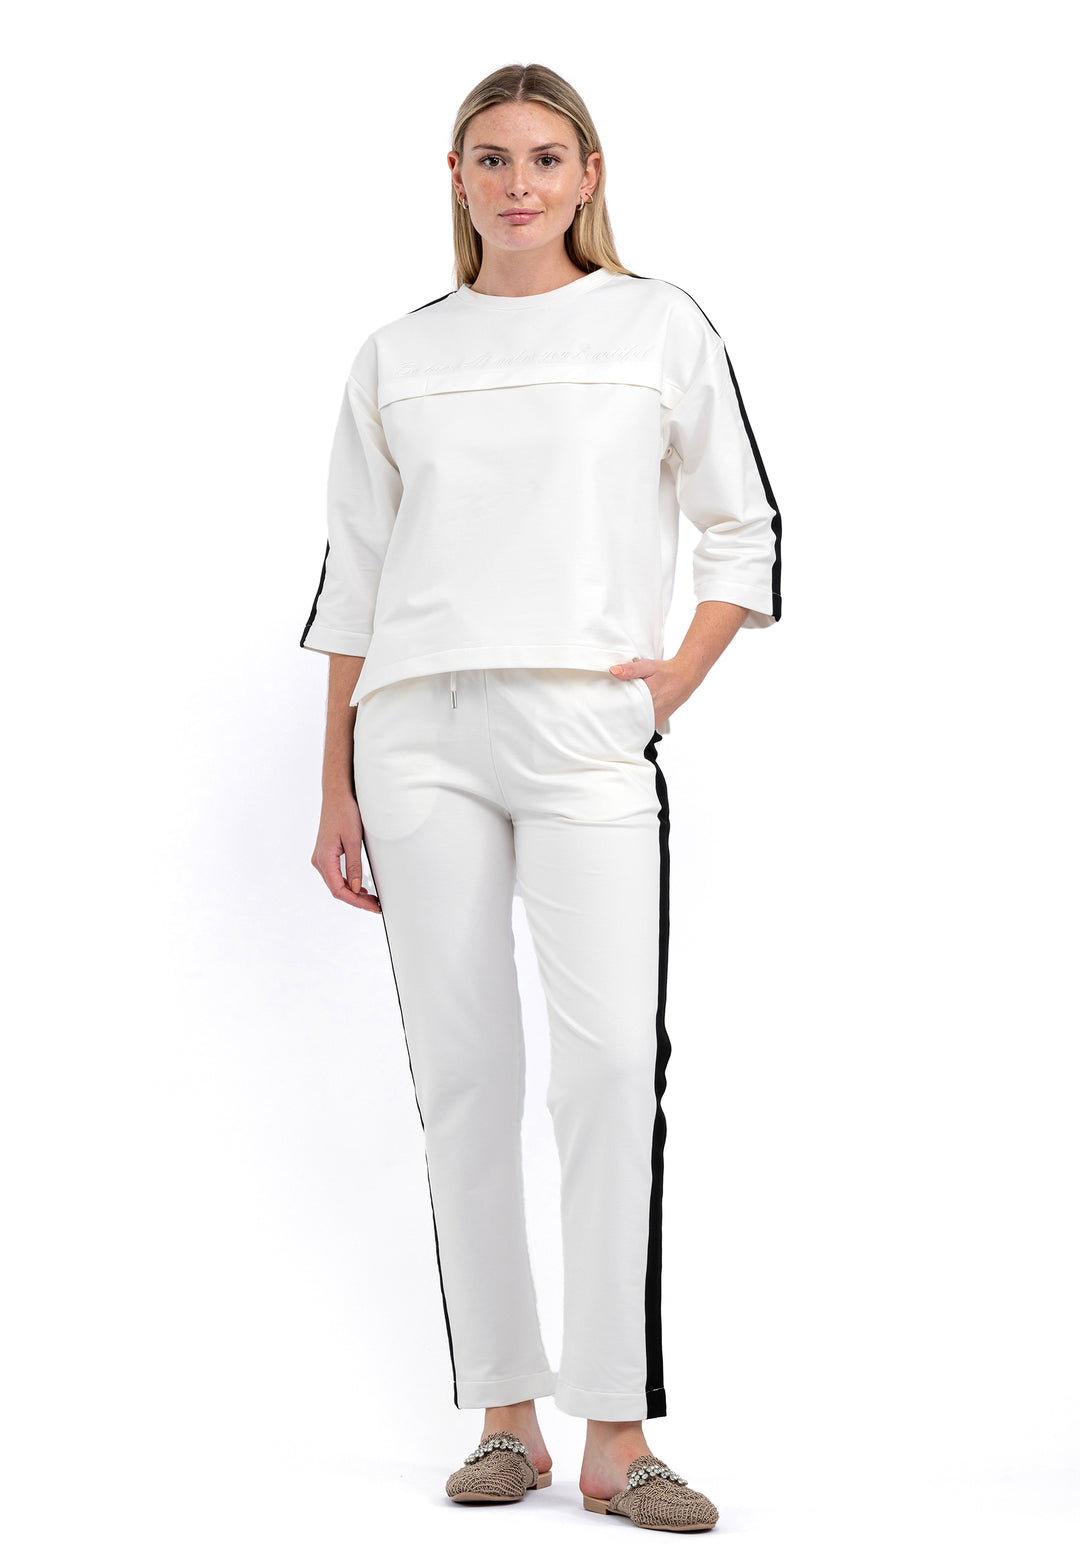 Tom Barron Ladies Half-short sleeve Tracksuit with Embroidery Detailing